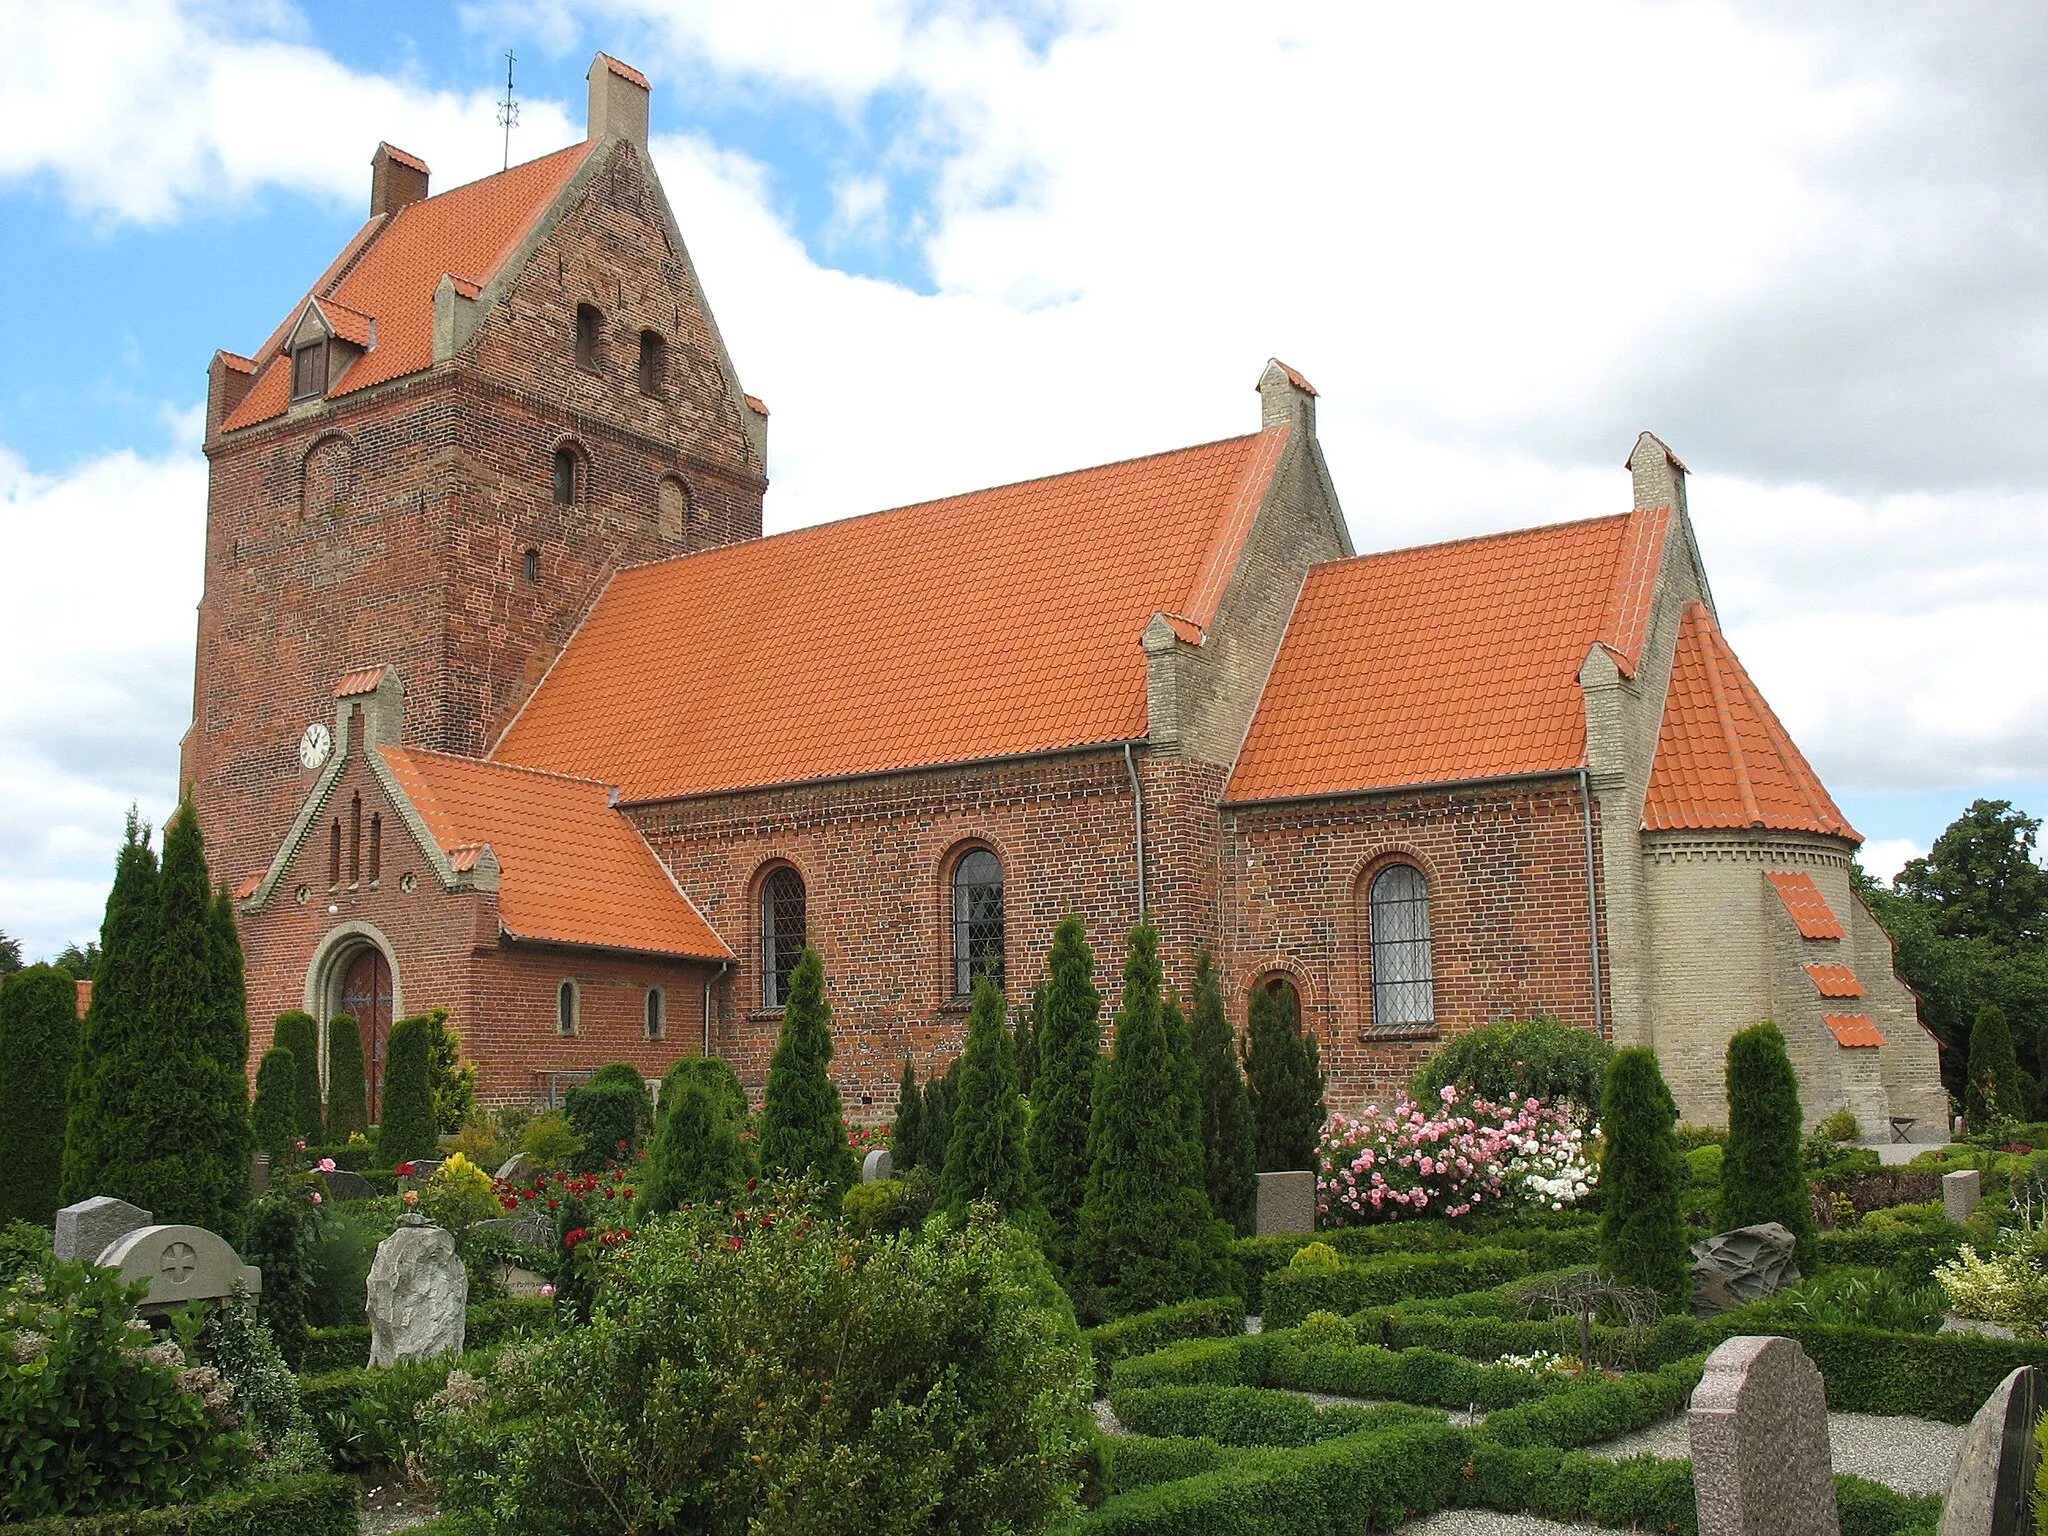 Photo showing: The church "Væggerløse Kirke" in the small town "Væggerløse" located on the island Falster in east Denmark.